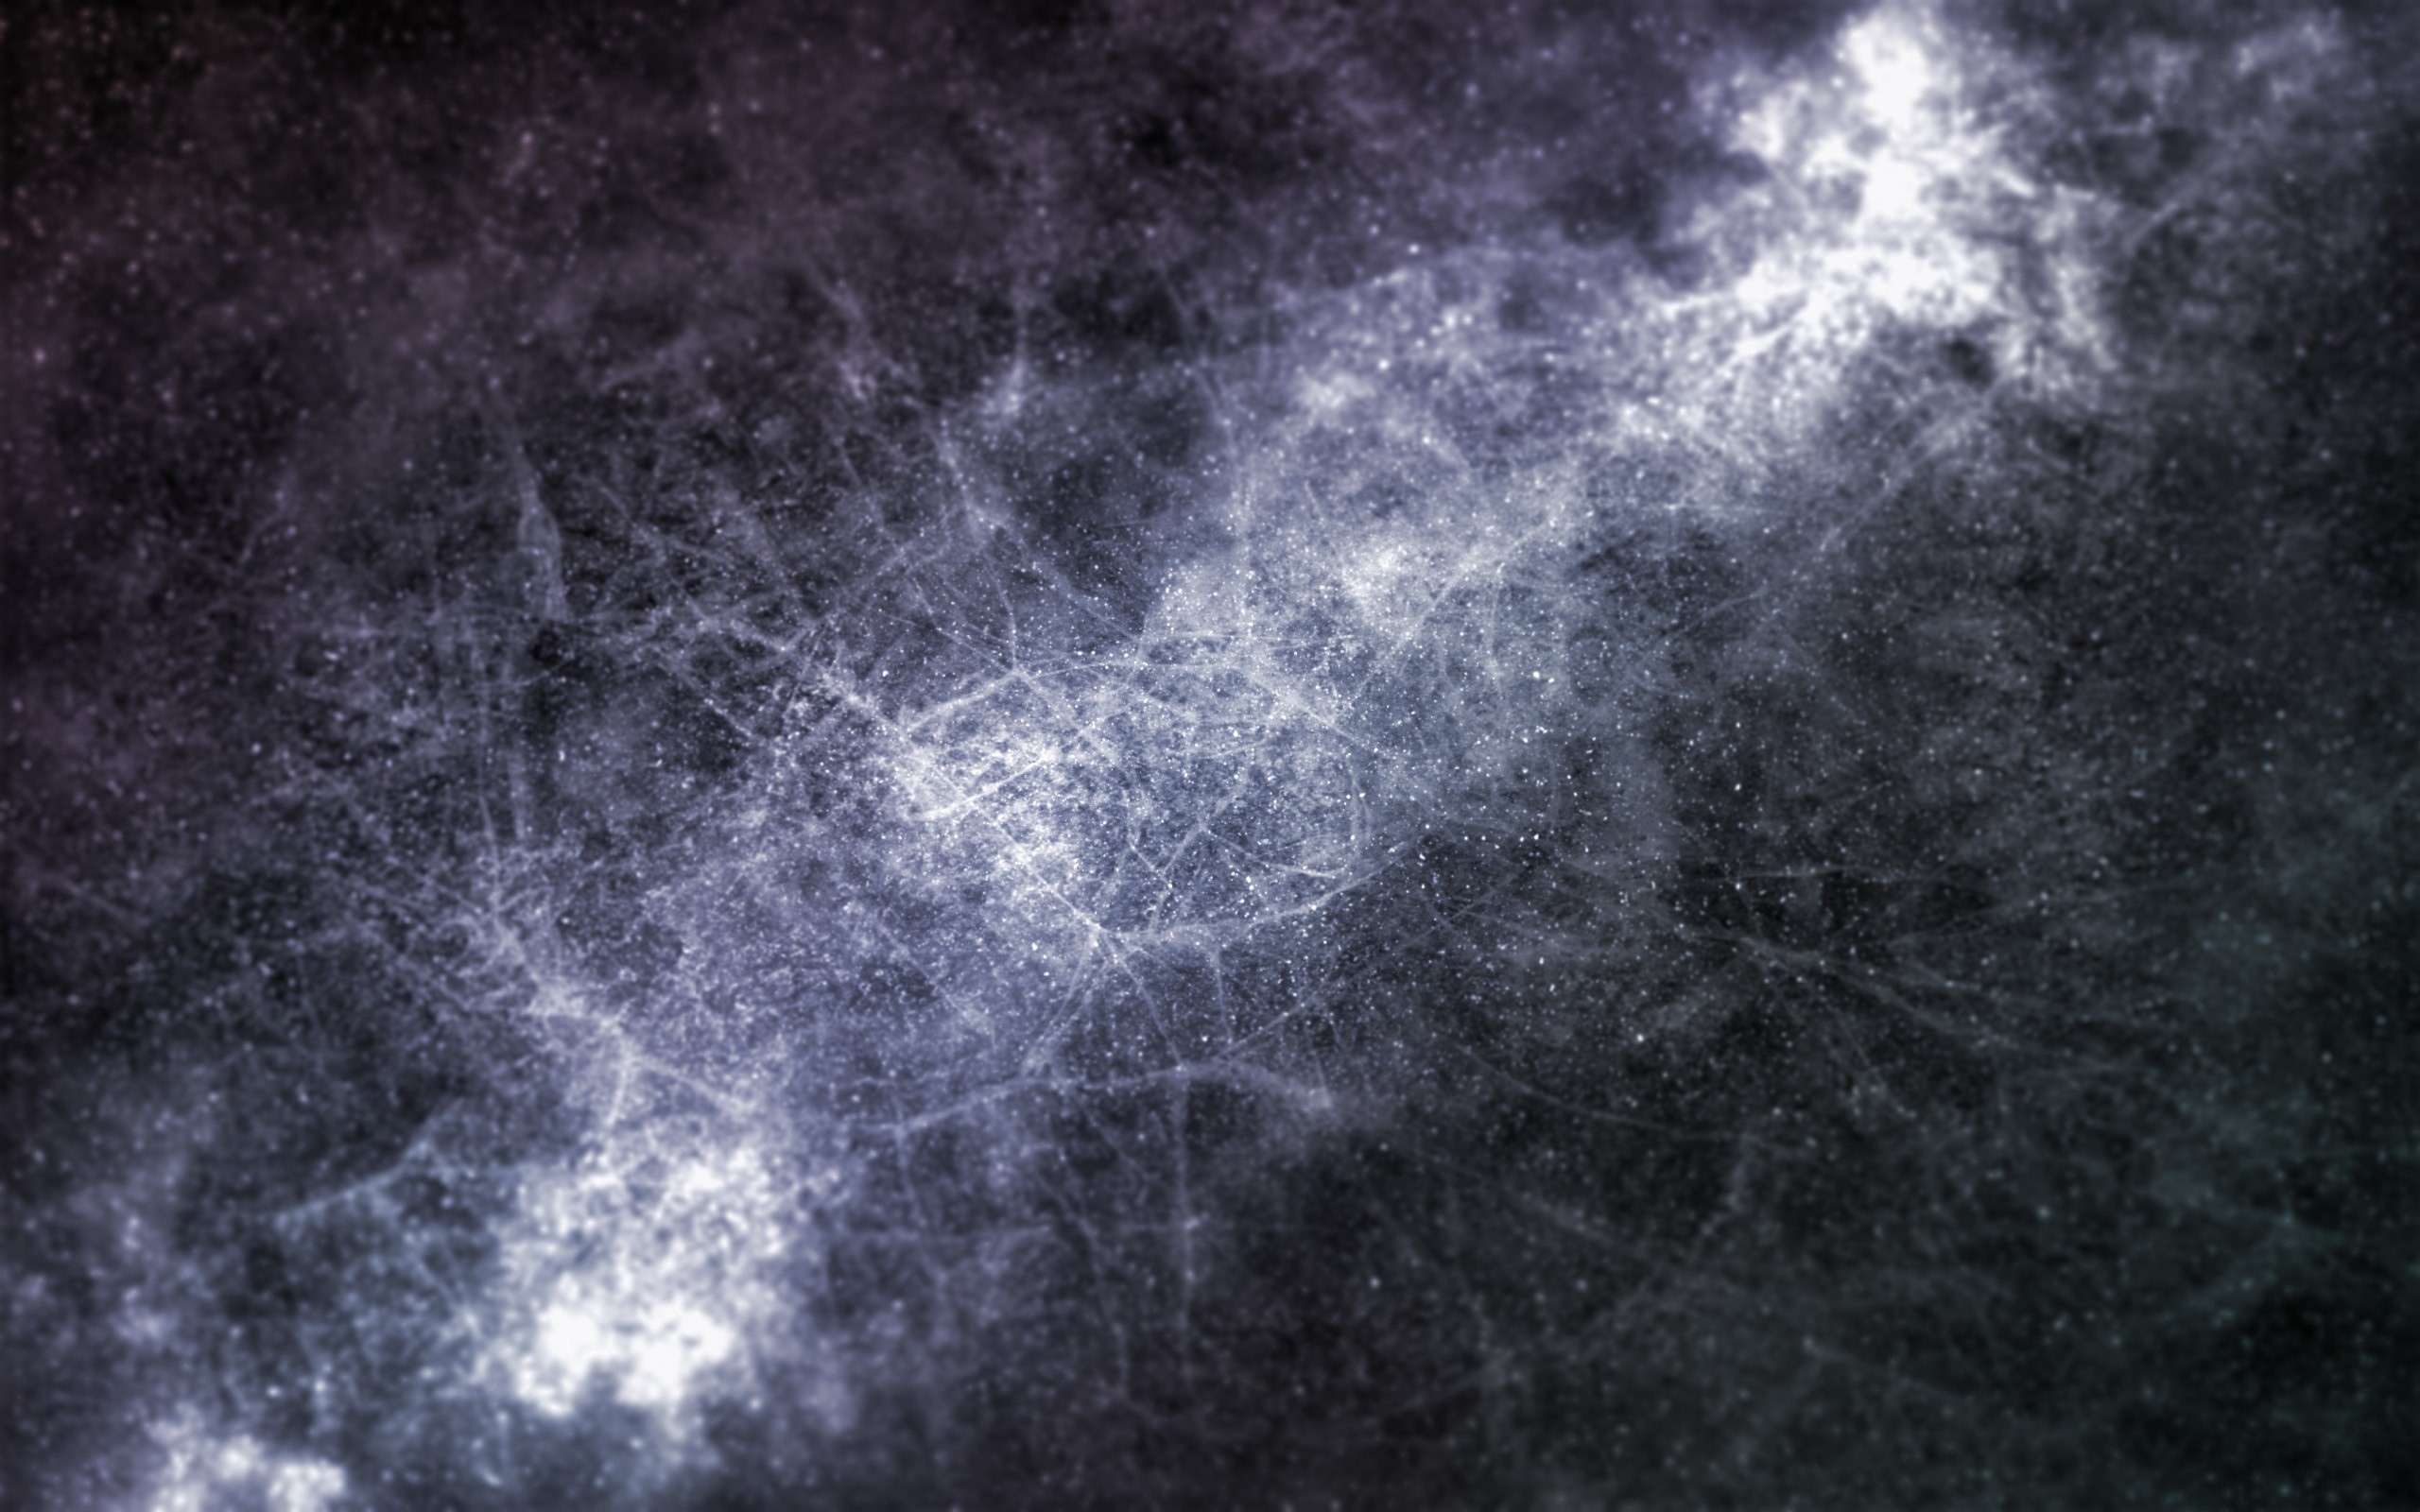 General 2560x1600 neurons space nebula stars Milky Way blurred abstract DeviantArt